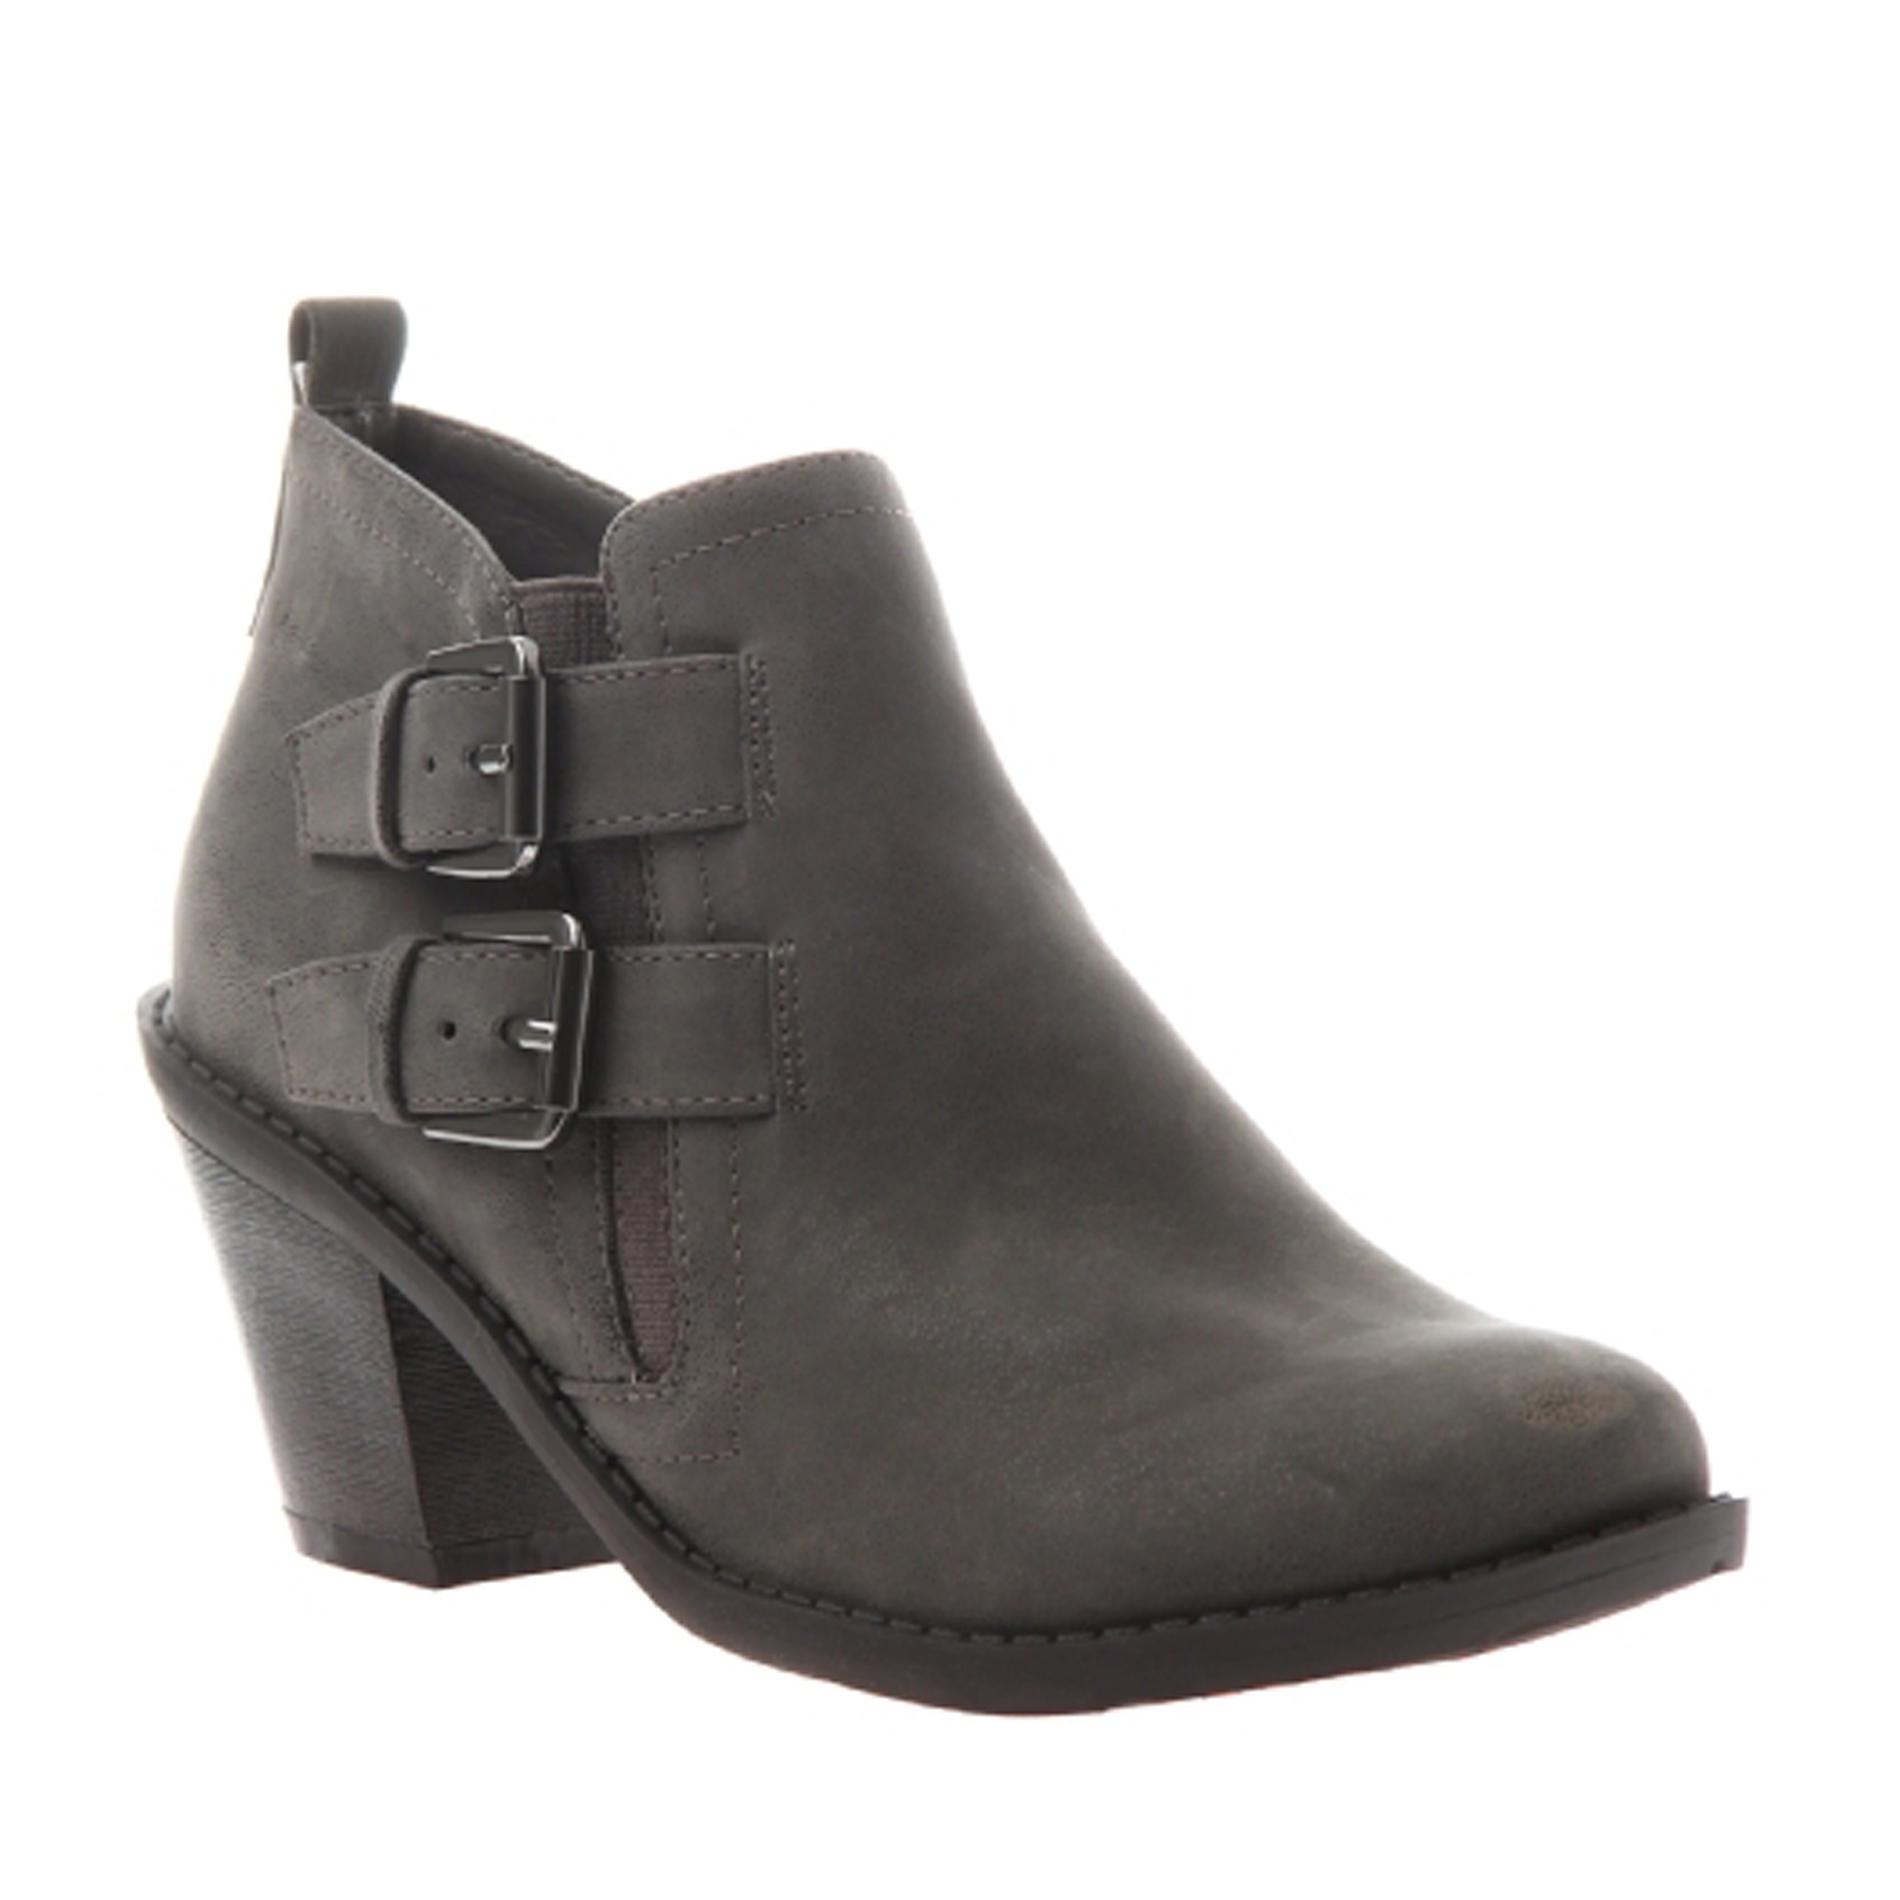 Madeline Women's Stylish Gray Ankle Bootie